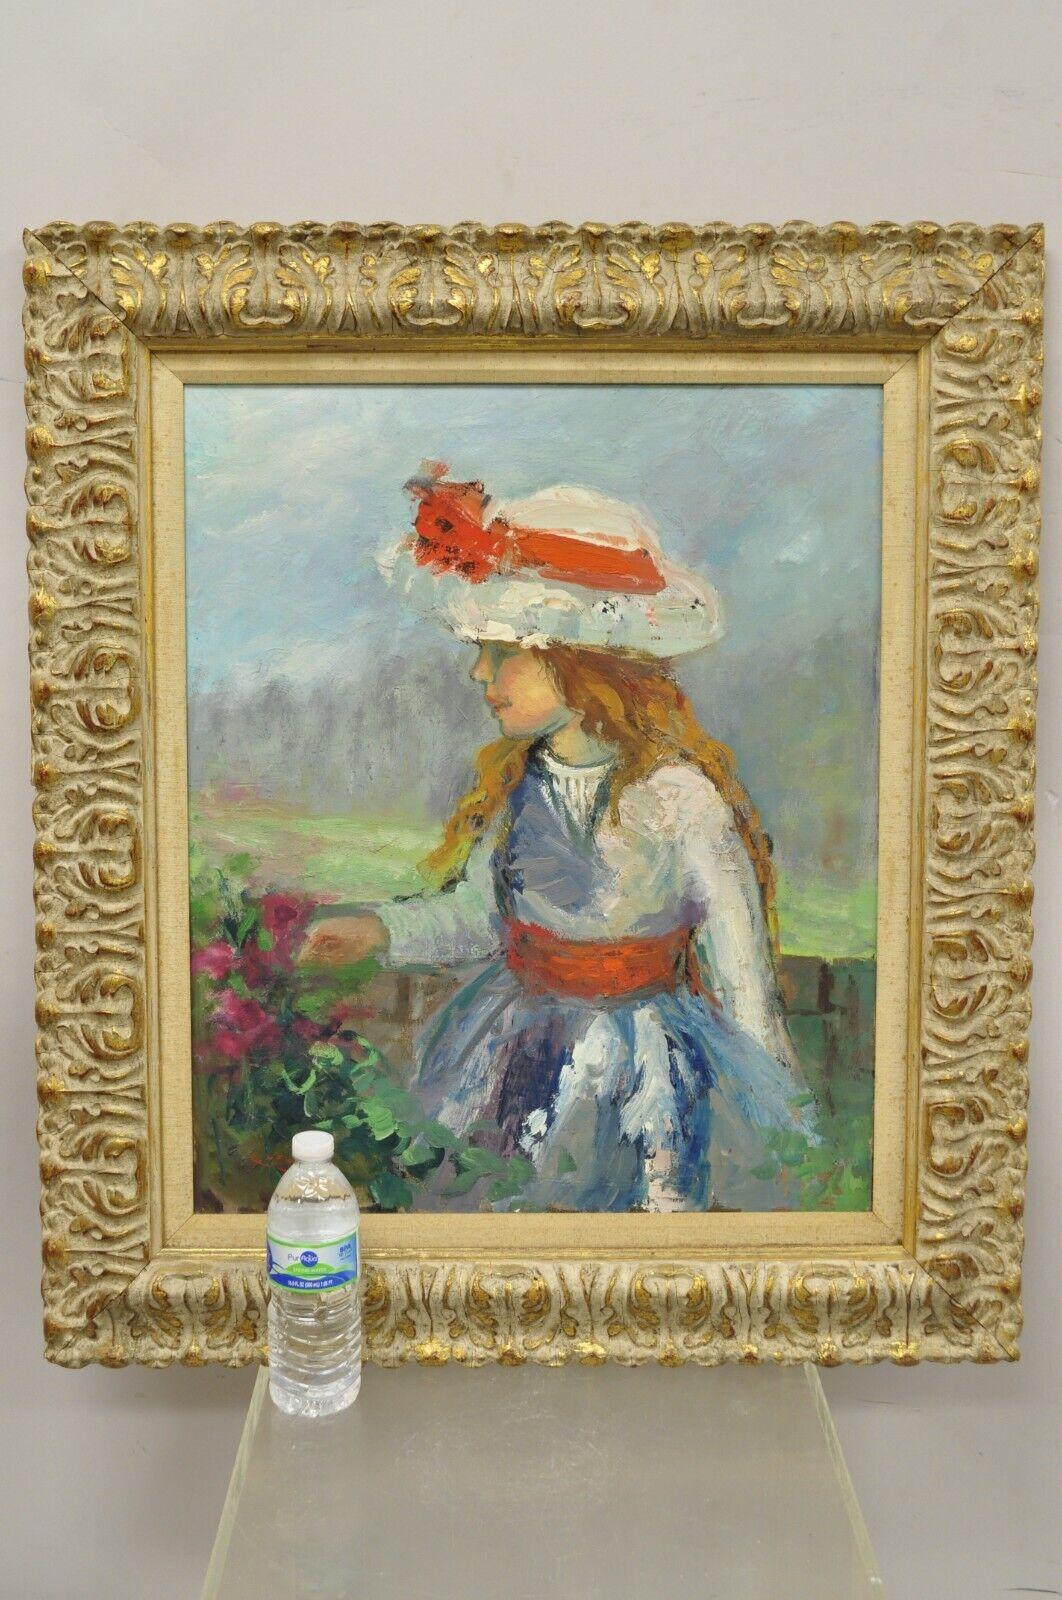 Zaza (Meuli) Milieu (Born 1892) Oil on Canvas Framed Impressionist Girl in Hat with Orange Bow with Flowers. Item features wonderful color and impressionist form, distressed gold giltwood frame, 